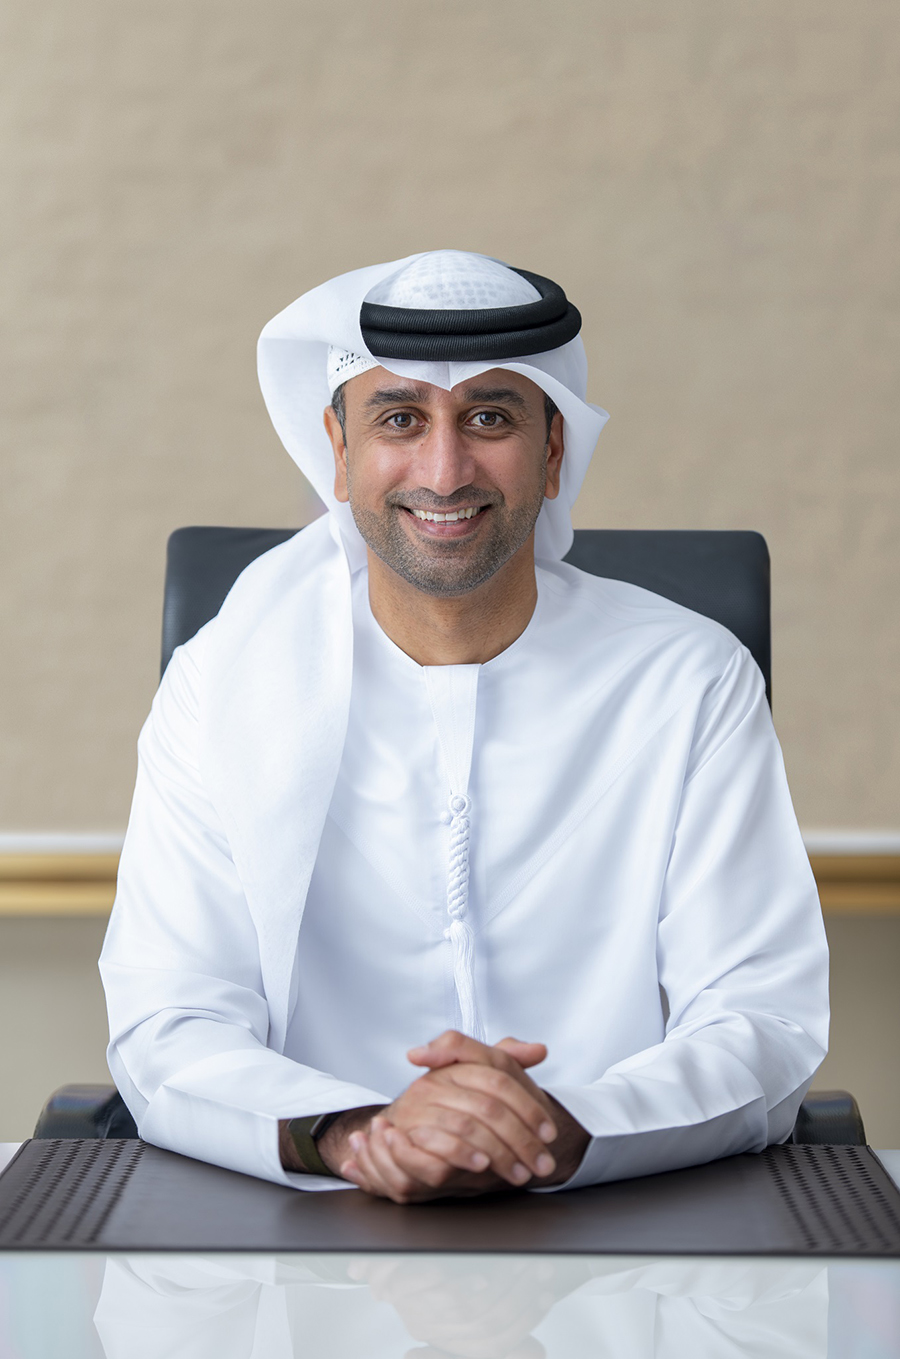 Image for du Announces Launch Of Two New Data Centers To Support Digital Transformation Projects And Expand Its Digital Infrastructure Presence Across The UAE